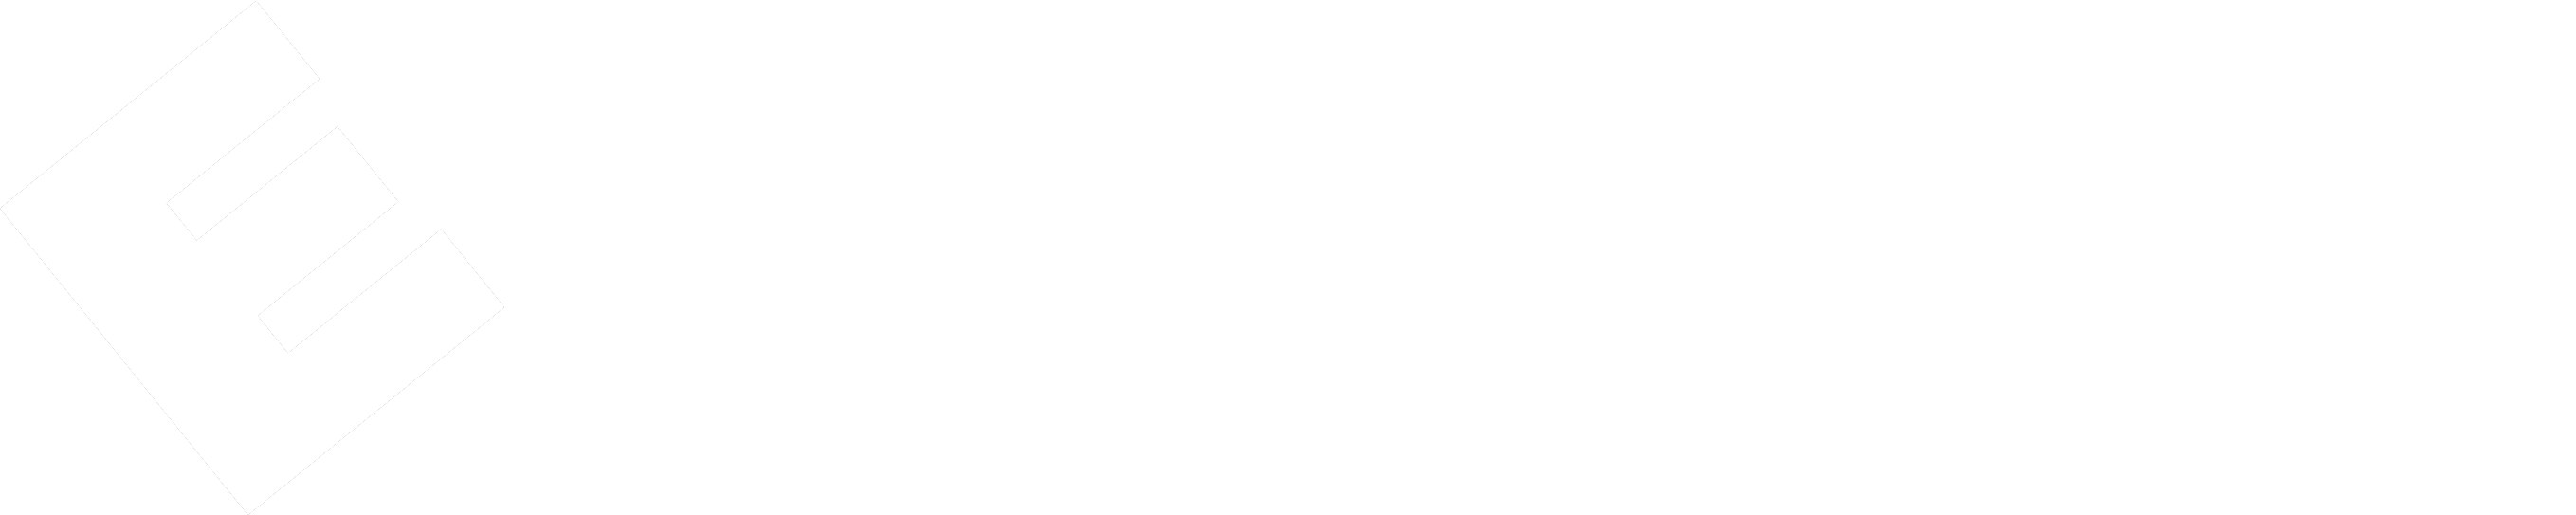 NEVV Outsourcing IT